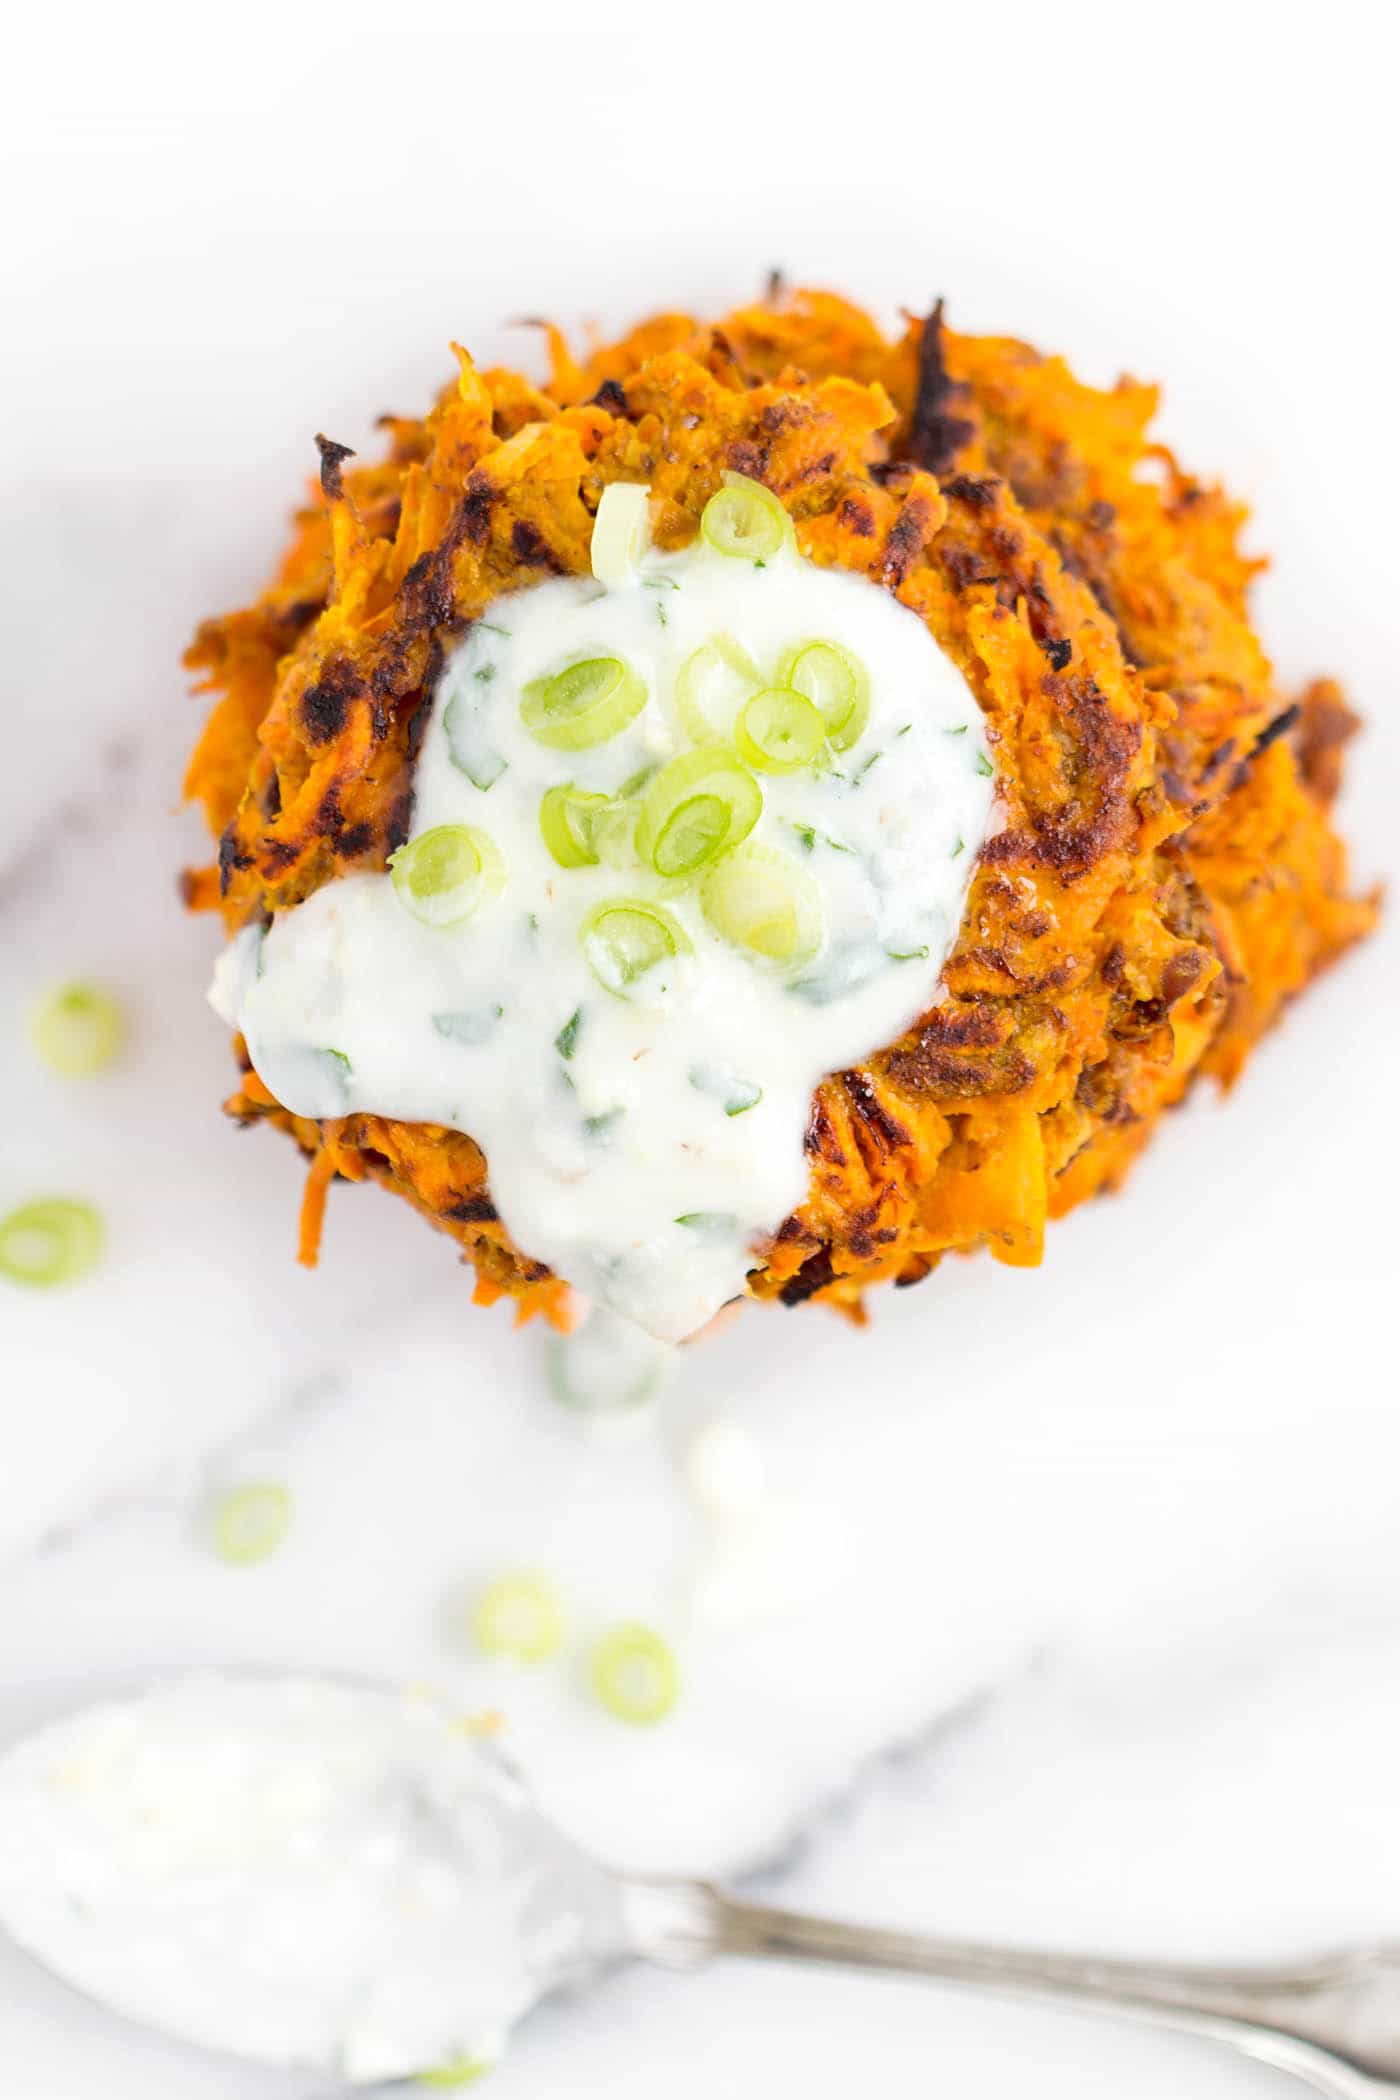 Curried Carrot + Sweet Potato Fritters...with only 6 ingredients, one bowl and HEALTHY too!